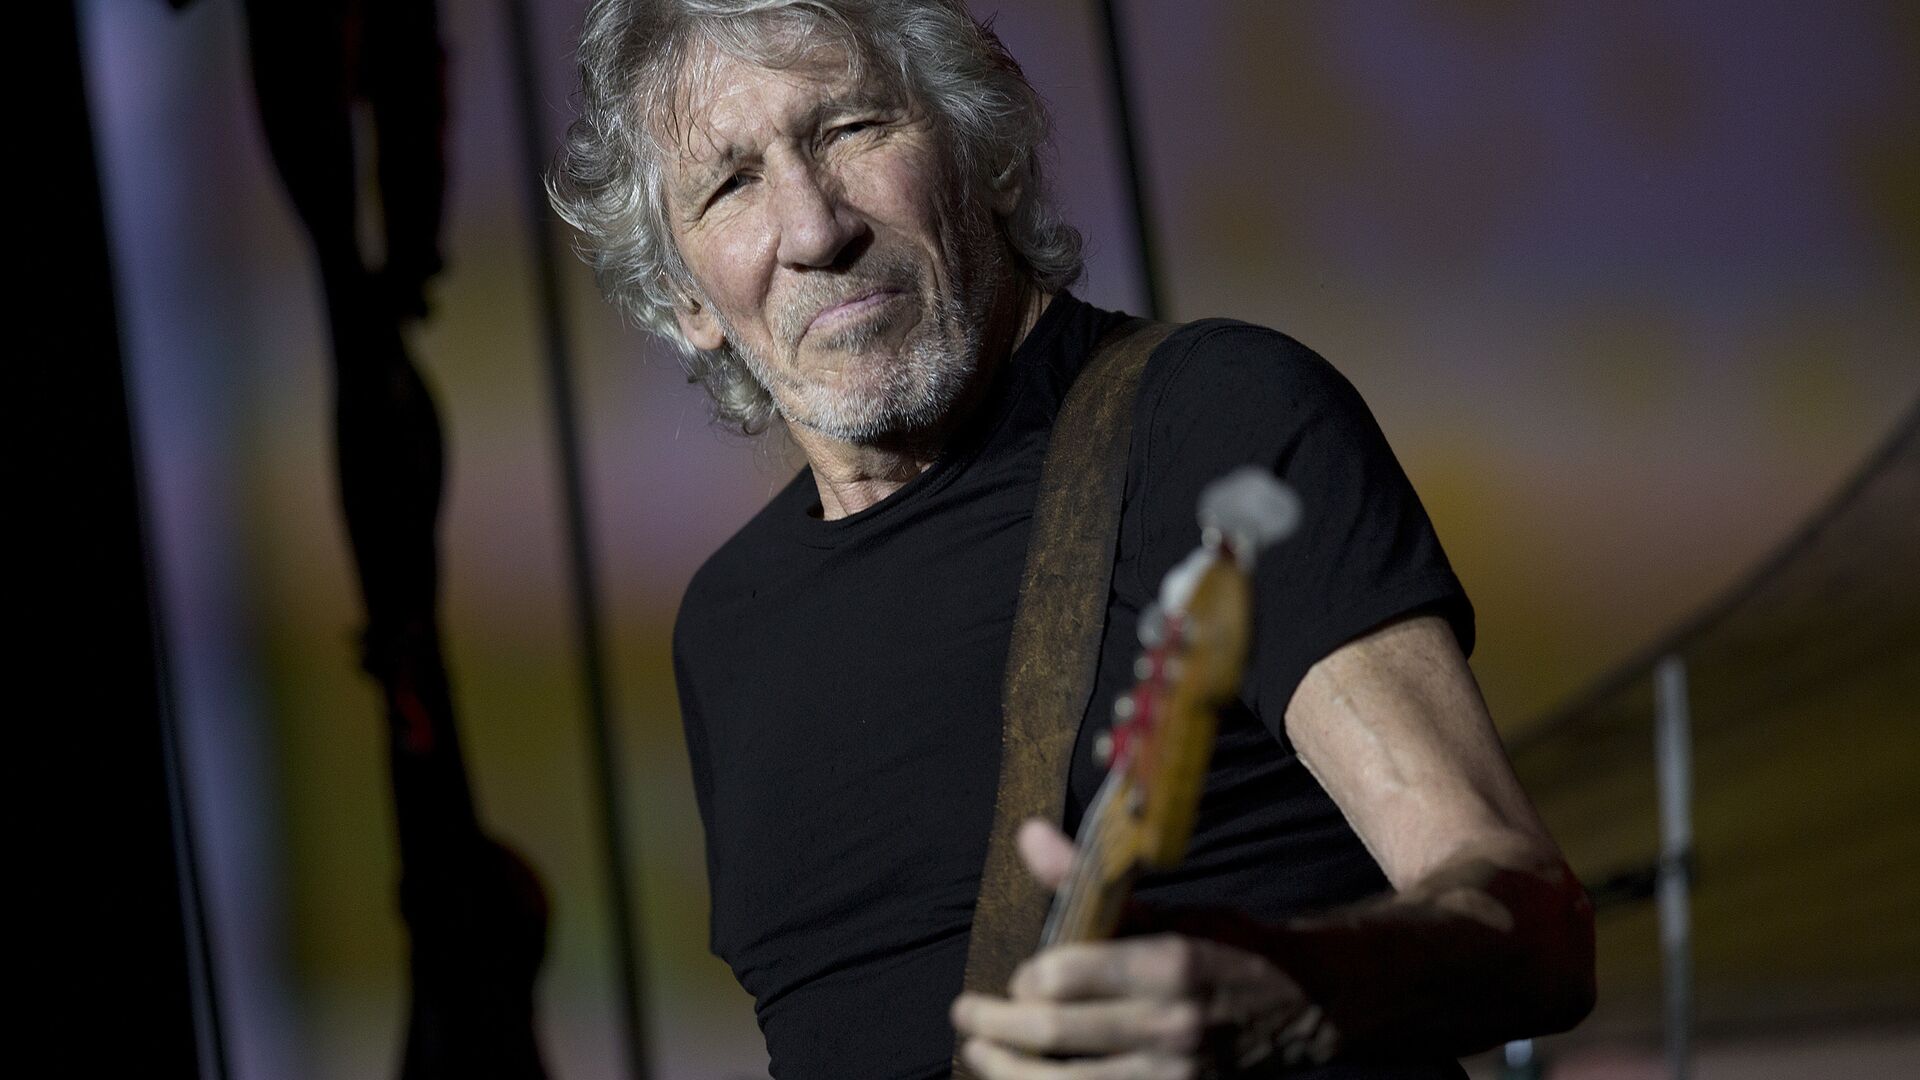 British singer and songwriter Roger Waters performs during his concert of the Us+Them tour at Maracana stadium, Rio de Janeiro, Brazil, Wednesday, Oct. 24, 2018 - Sputnik International, 1920, 22.08.2022